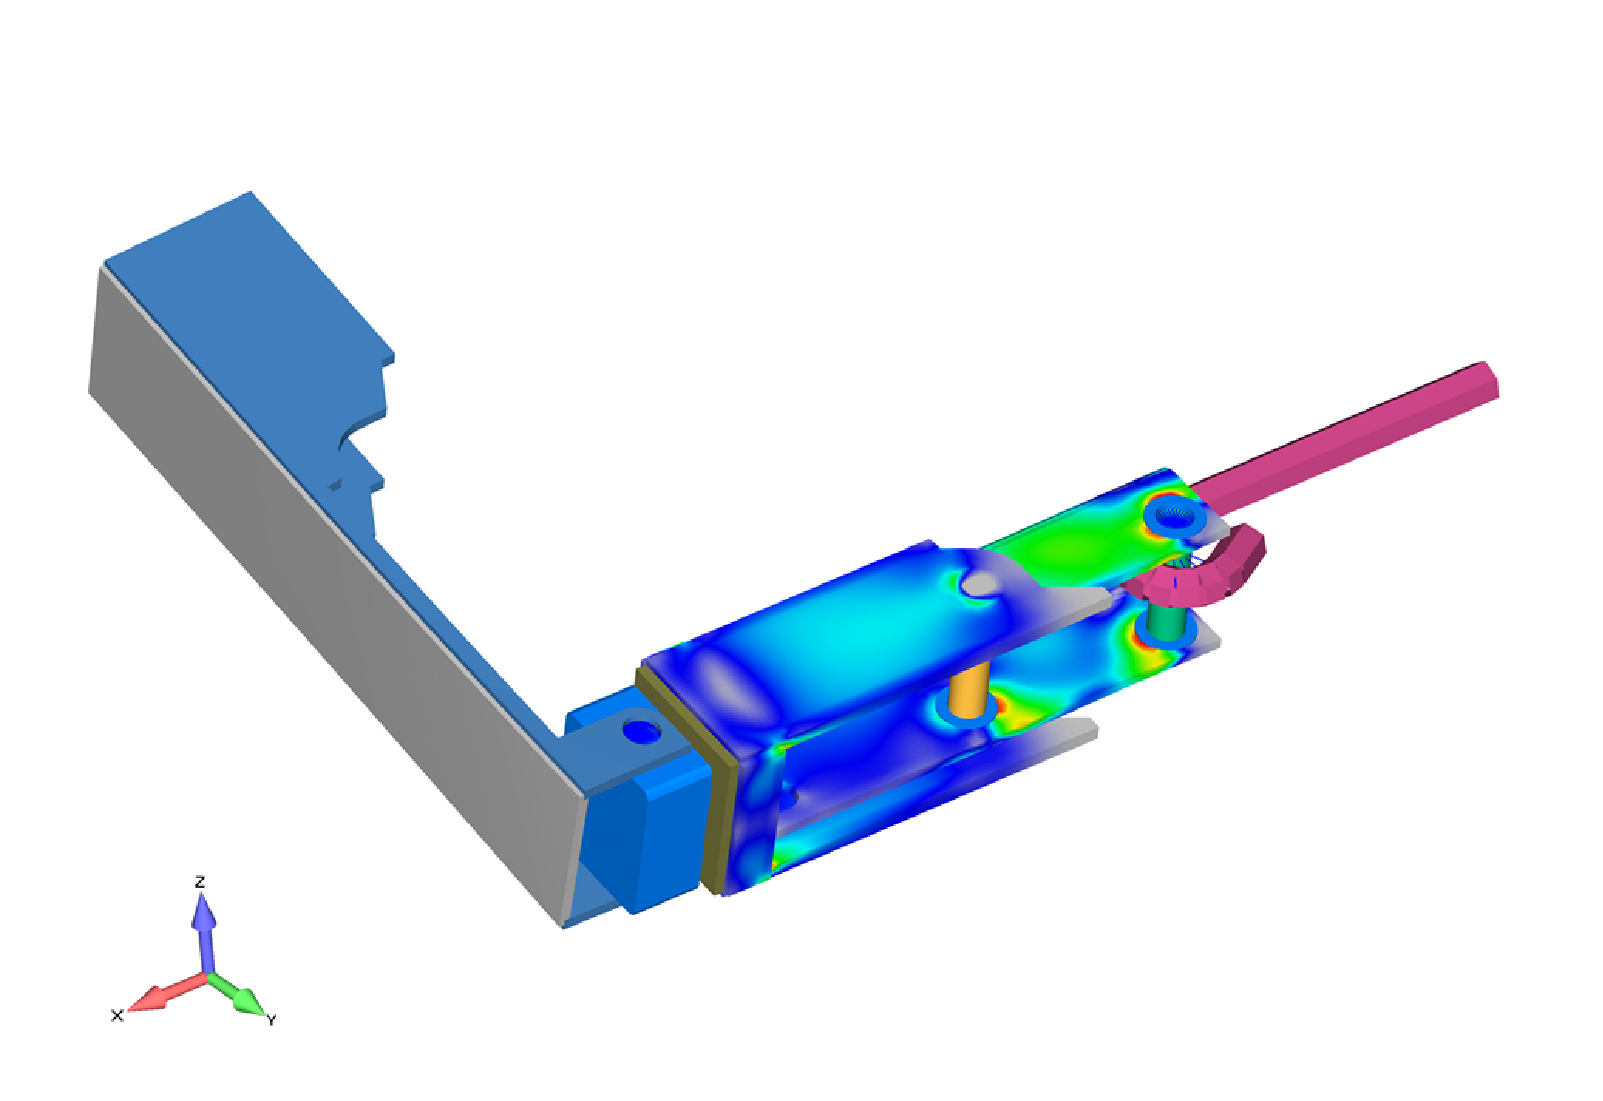 FEA Simulation of hand tool for ultimate mechanical strength during hex nut torque operations.  Stress and deflection analysis to determine optimized ergometric operation FEA Optimization Services